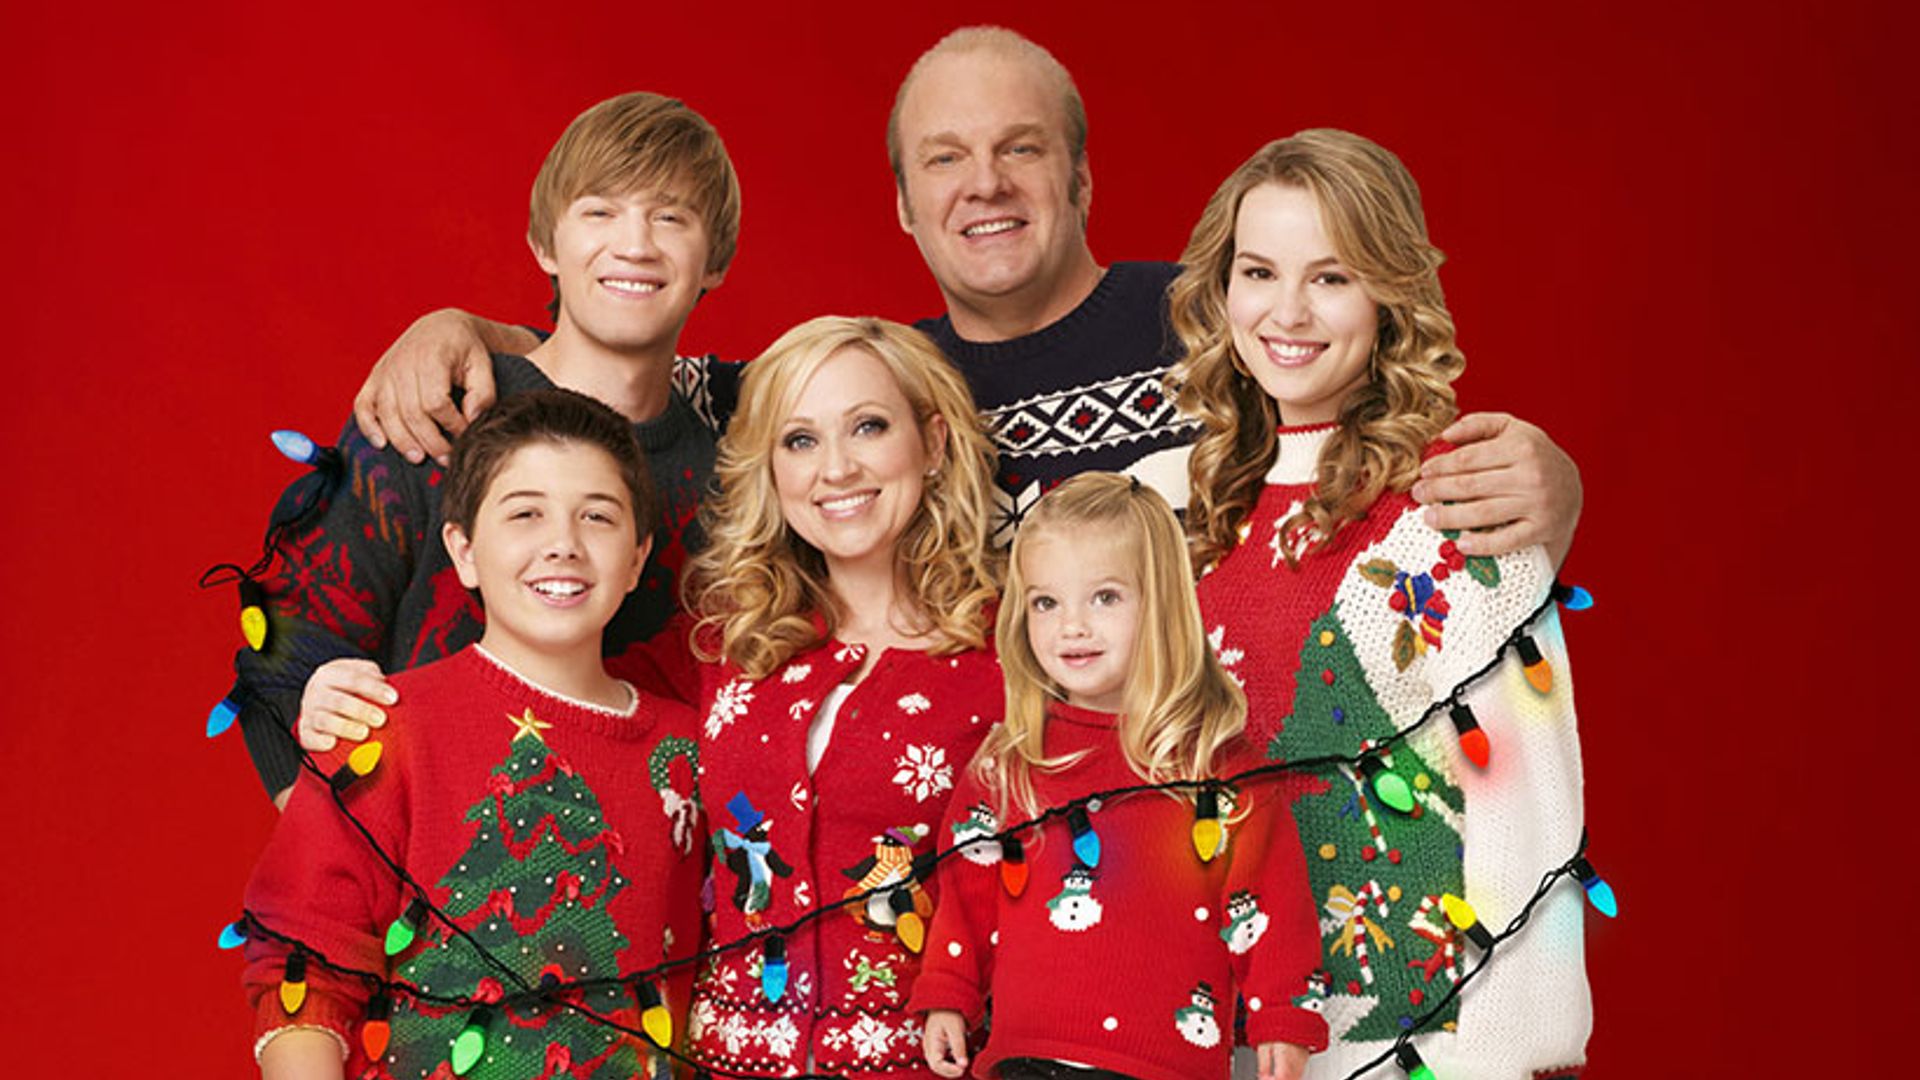 Find out what the Good Luck Charlie cast looks like now | HELLO!